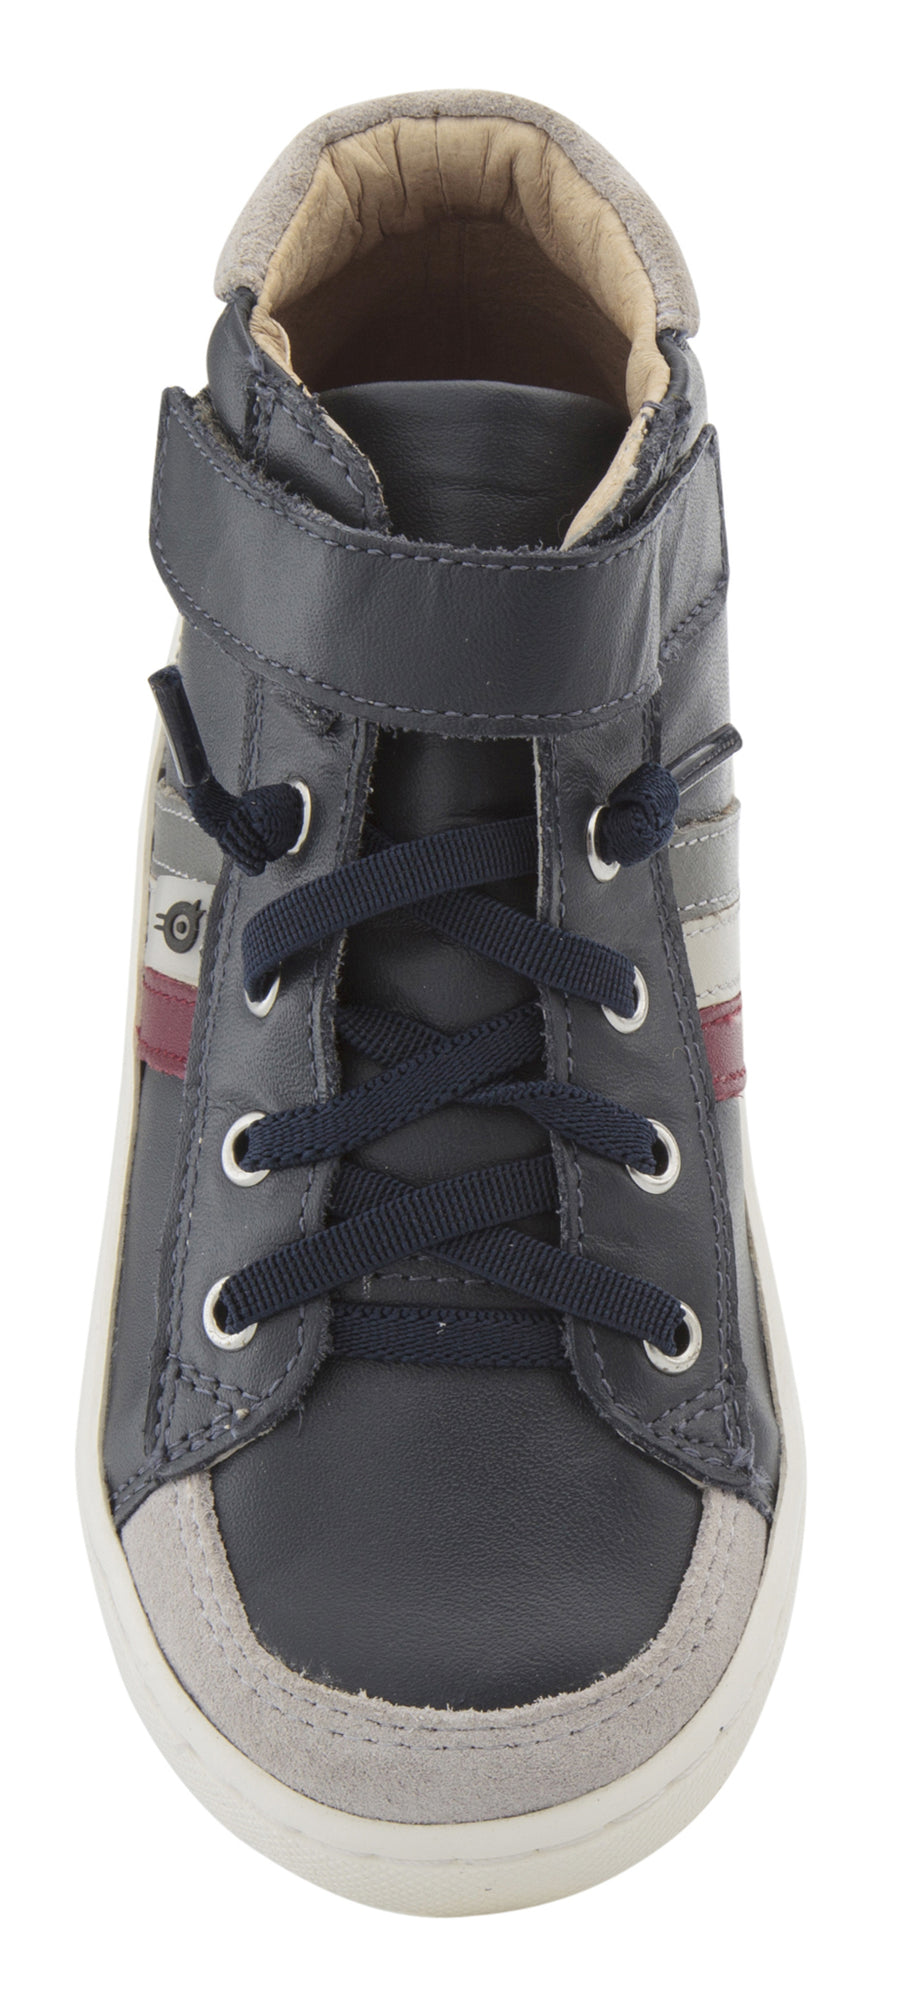 Old Soles Boy's & Girl's  Glambo High Top Leather Sneakers - Navy/Burgundy/Gris/Grey